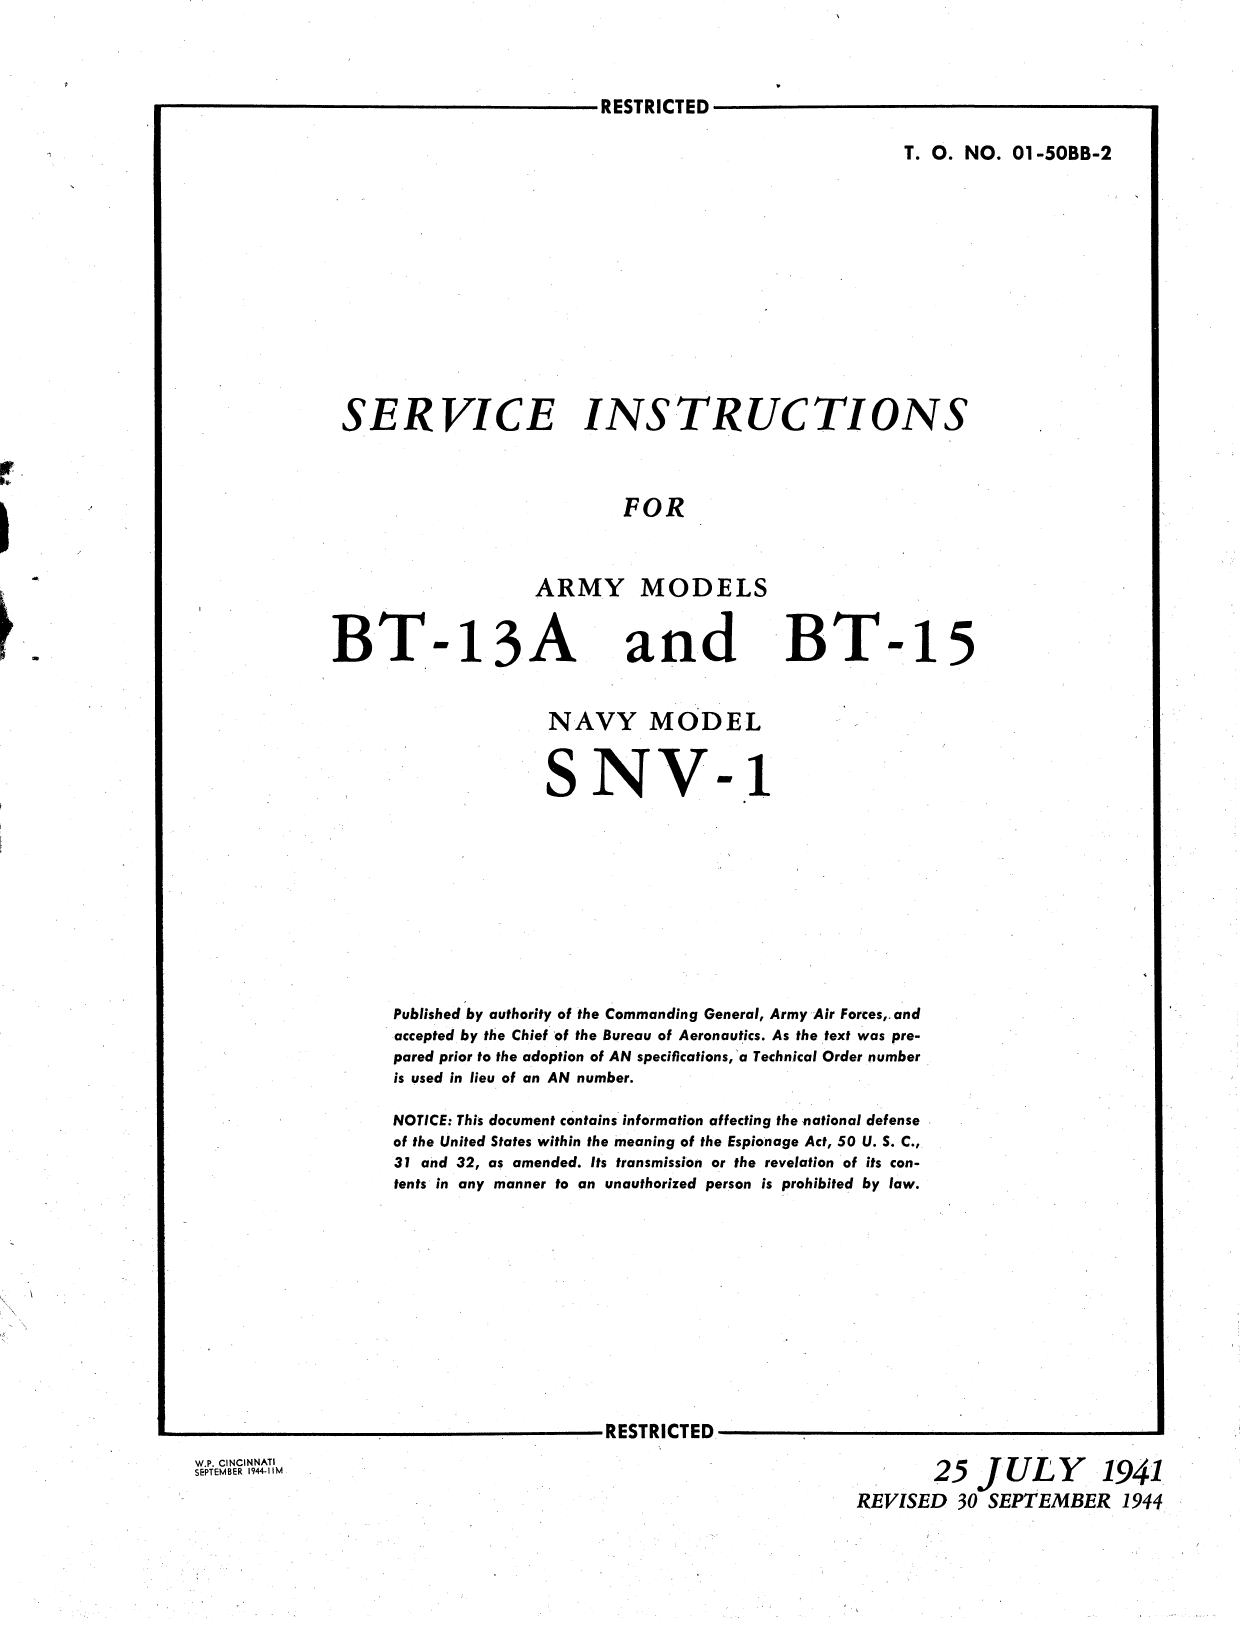 Sample page 1 from AirCorps Library document: Service Instructions - BT-13, BT-15, SNV-1